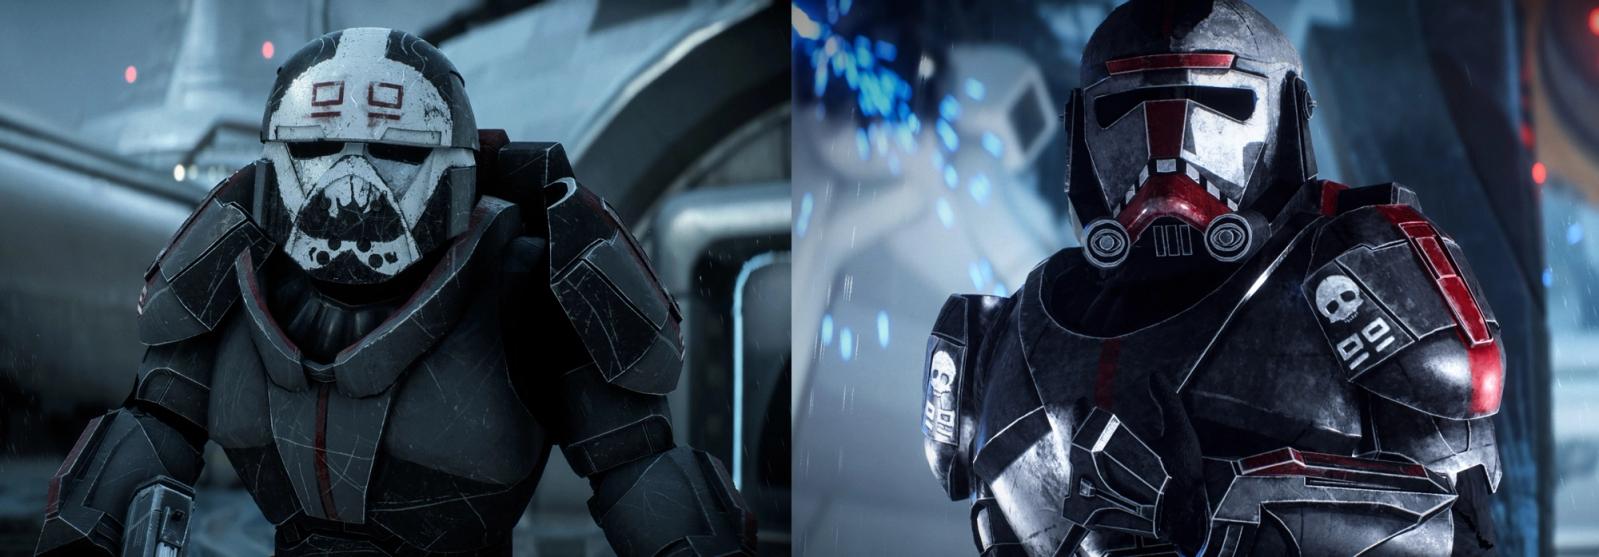 The two Bad Batch character models in Star Wars Battlefront 2. Hunter and Wrecker are side by side